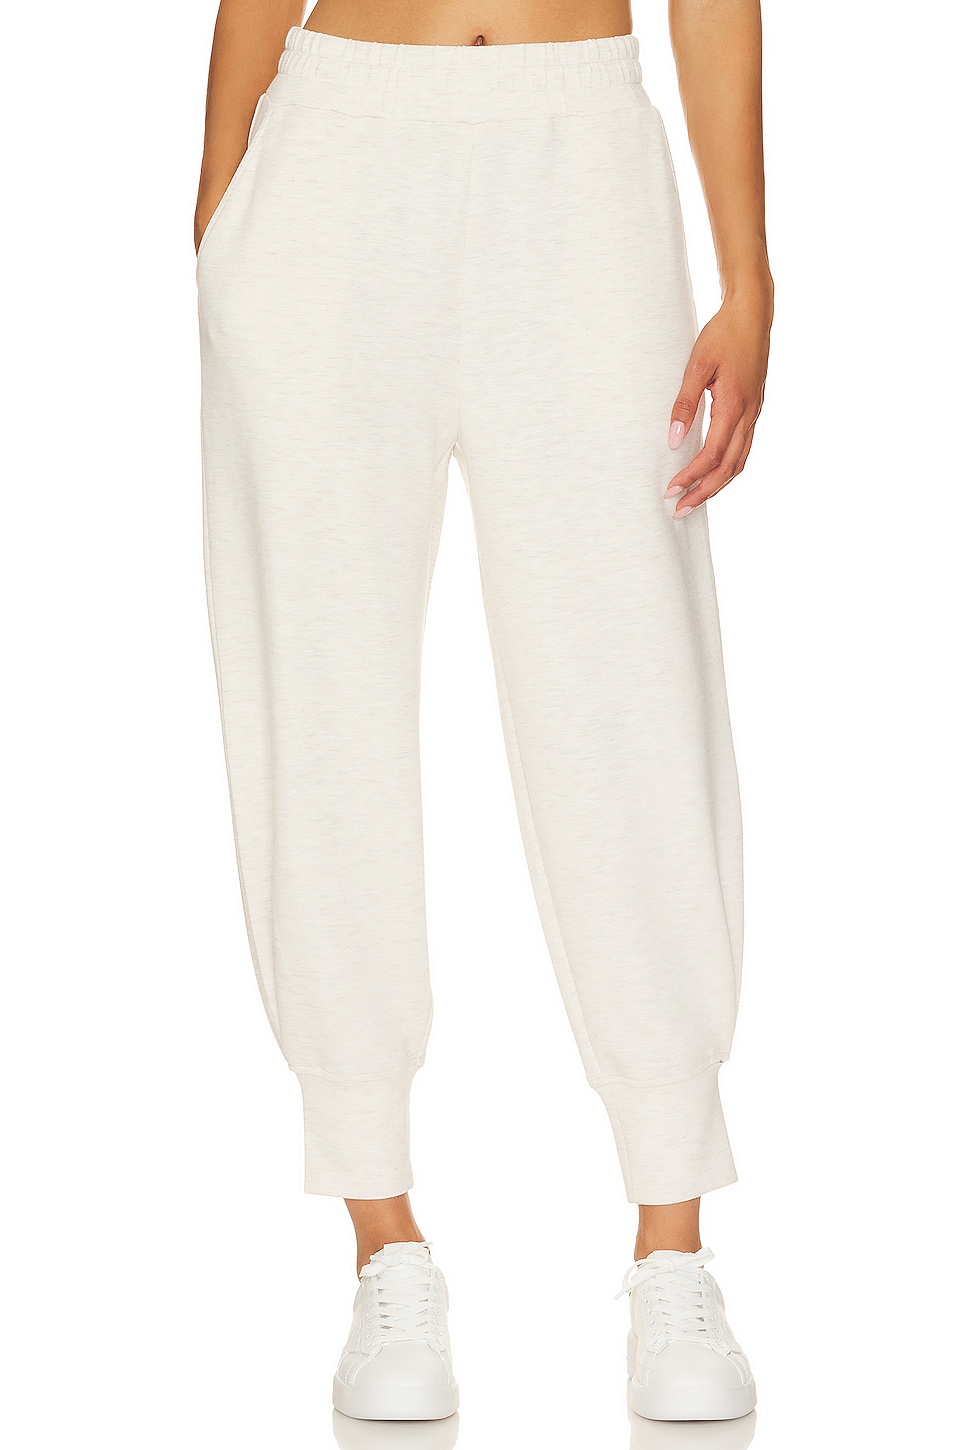 Varley The Relaxed Pant 25 in Ivory Marl